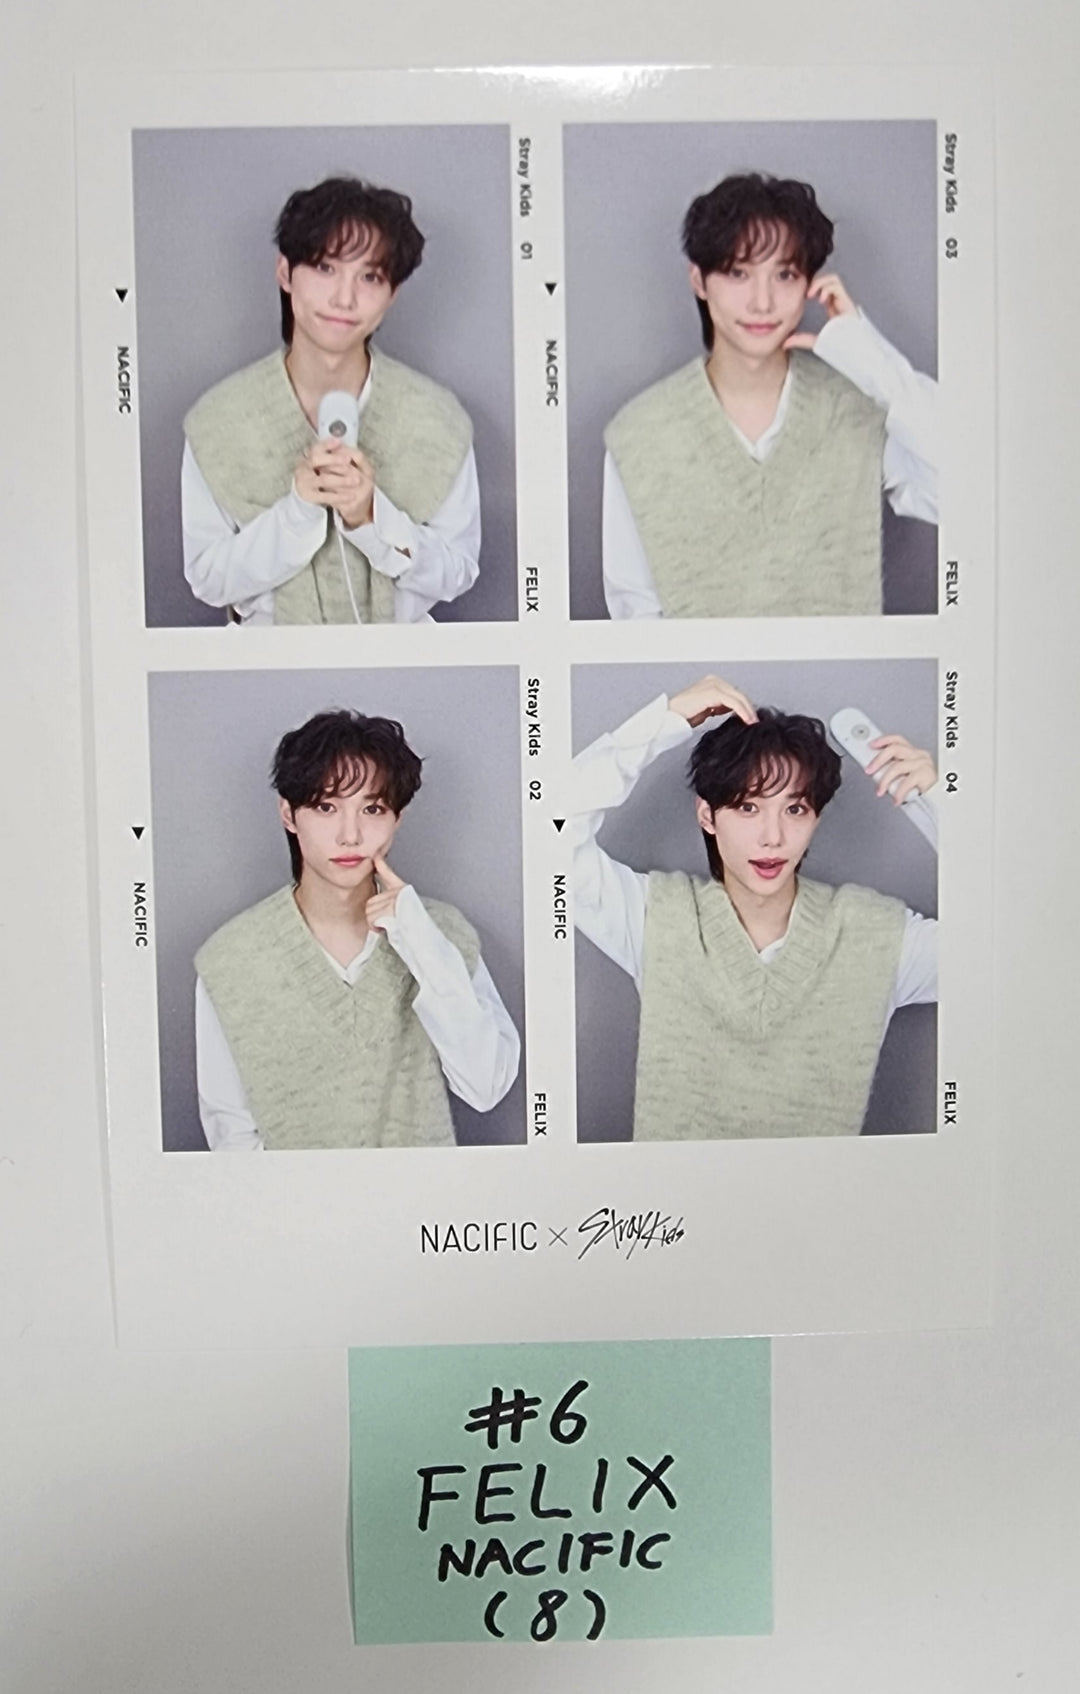 Stray kids X NACIFIC - Official Nacific Event  4 Cut Photo